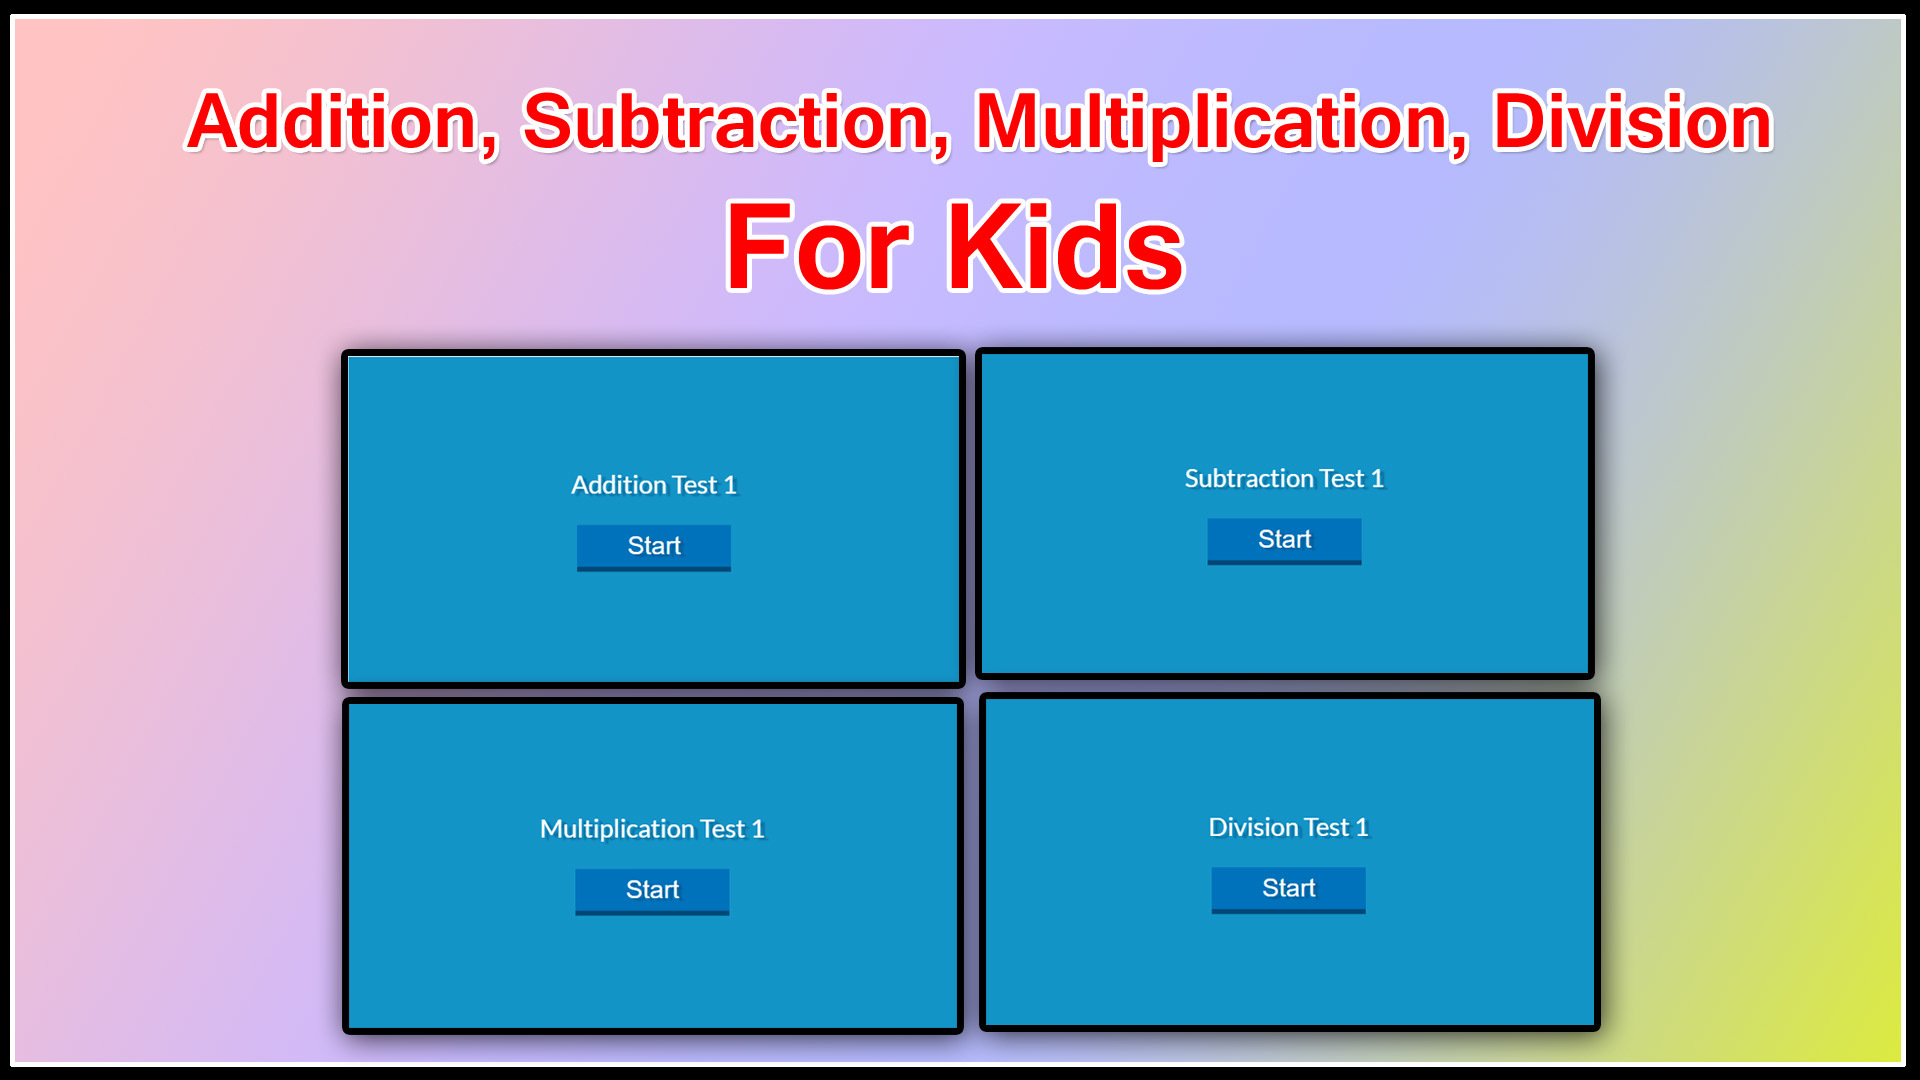 arithmetic-test-1-addition-subtraction-multiplication-division